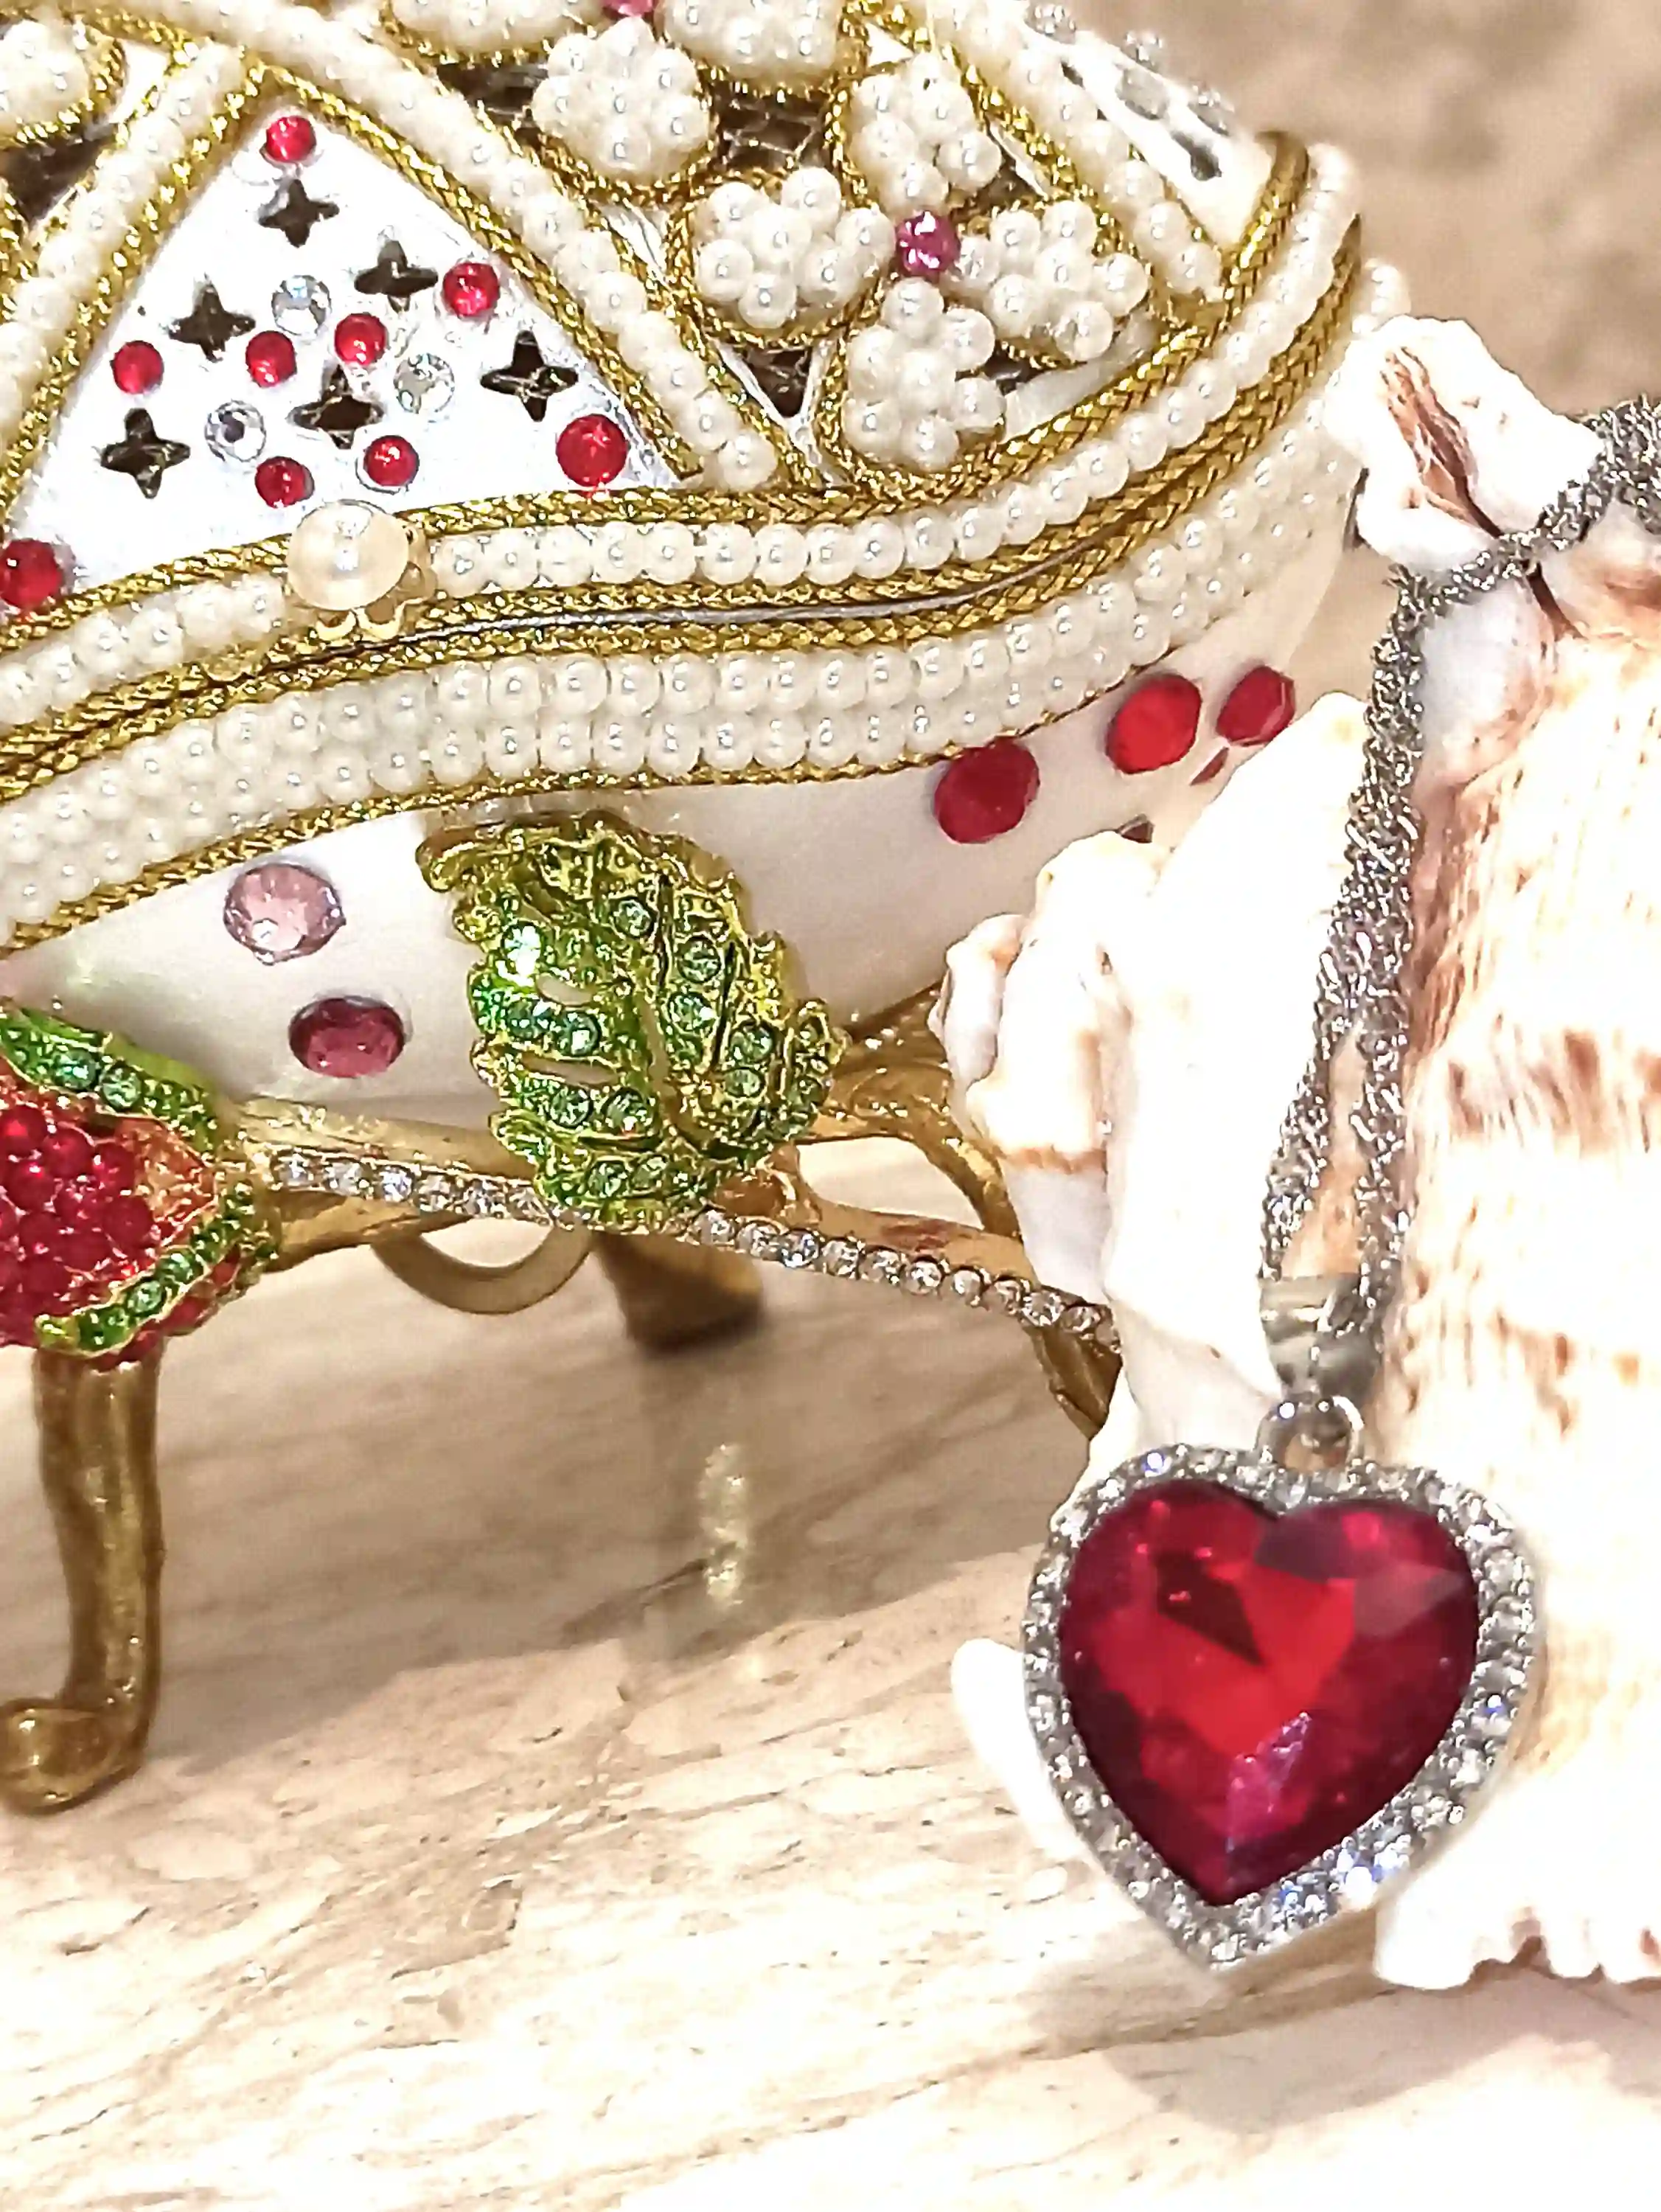 ONE of a Kind Faberge egg 24k GOLD Musical Jewelry Box + Sterling Silver Ruby Heart + Bracelet HANDCARVED Faberge Egg style Christmas gift 